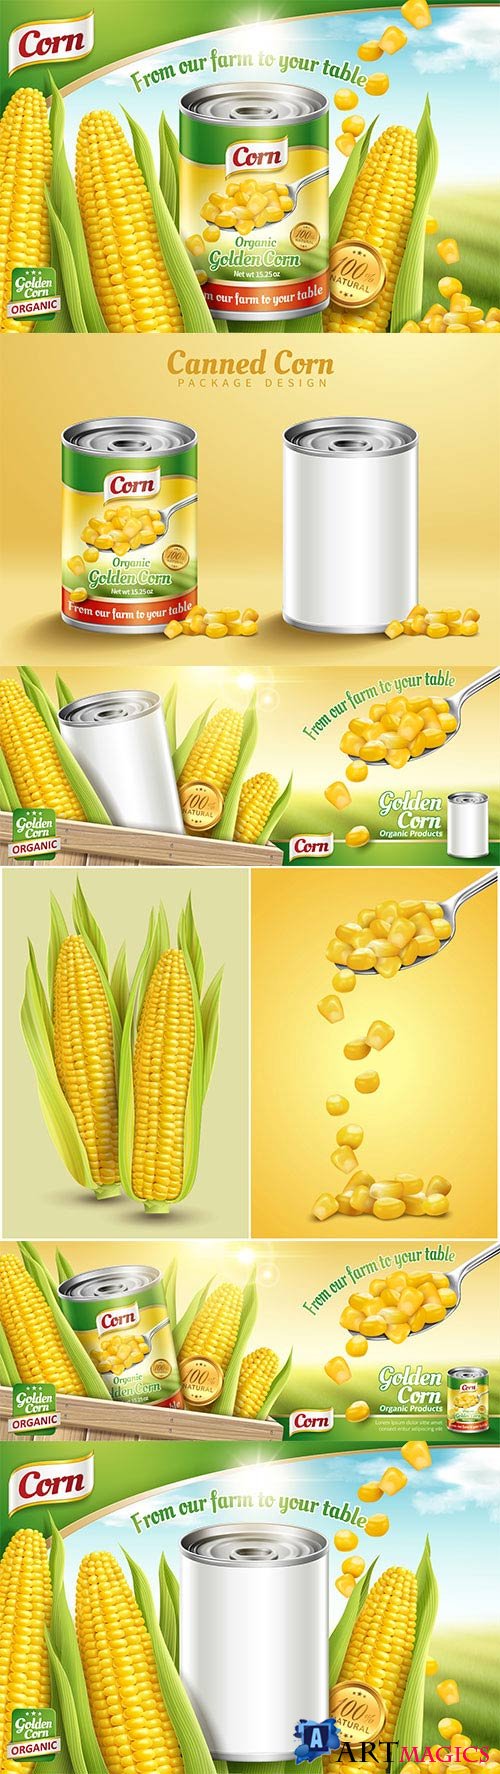 Organic canned corn ads in 3d vector illustration